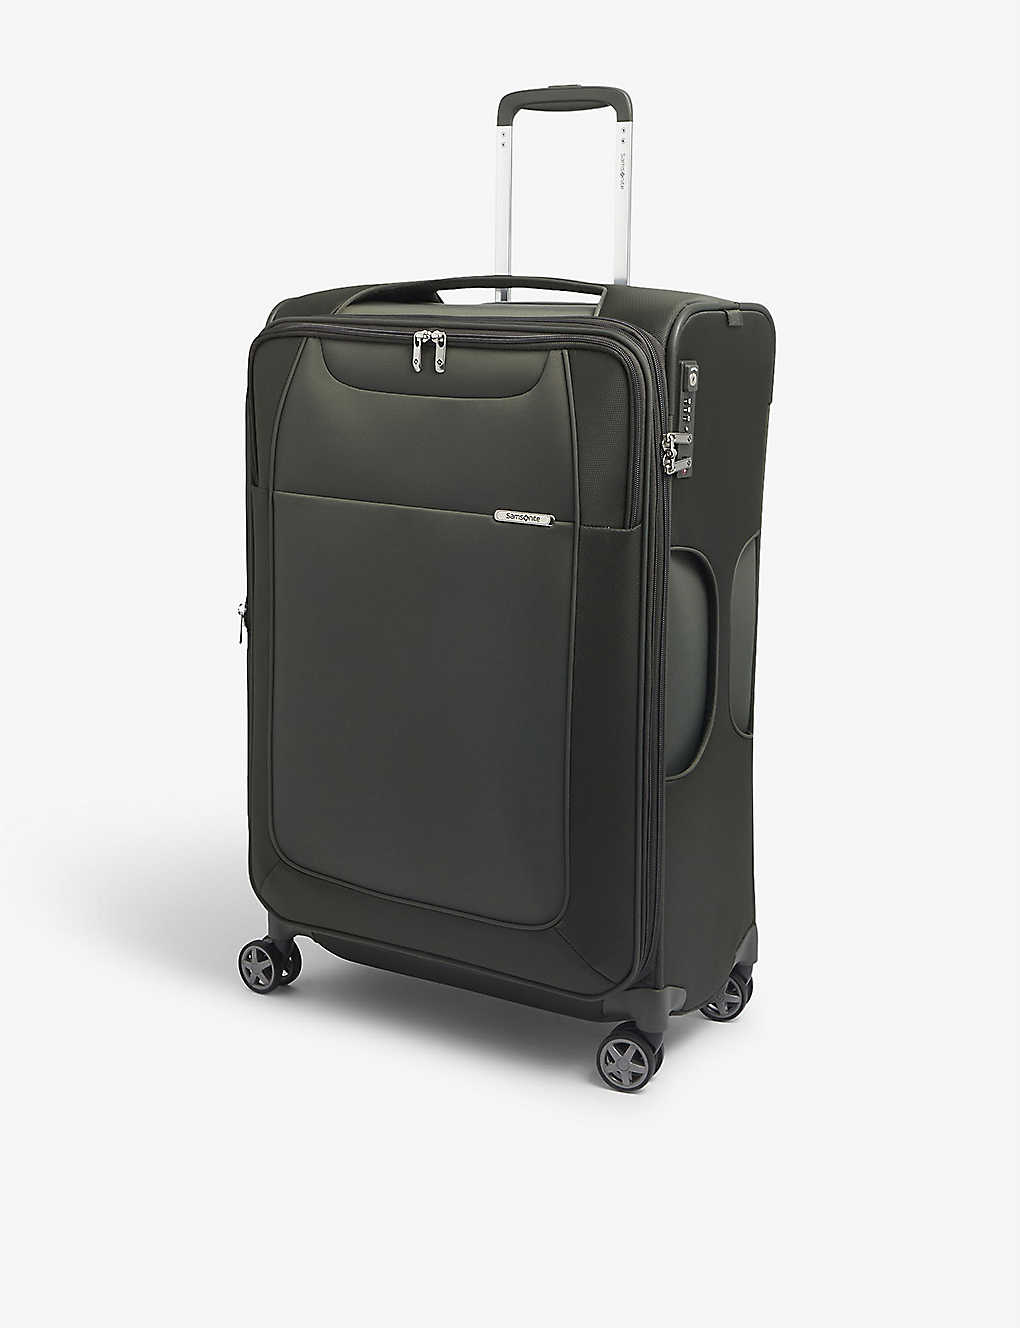 Samsonite Spinner Branded Woven Suitcase In Climbing Ivy